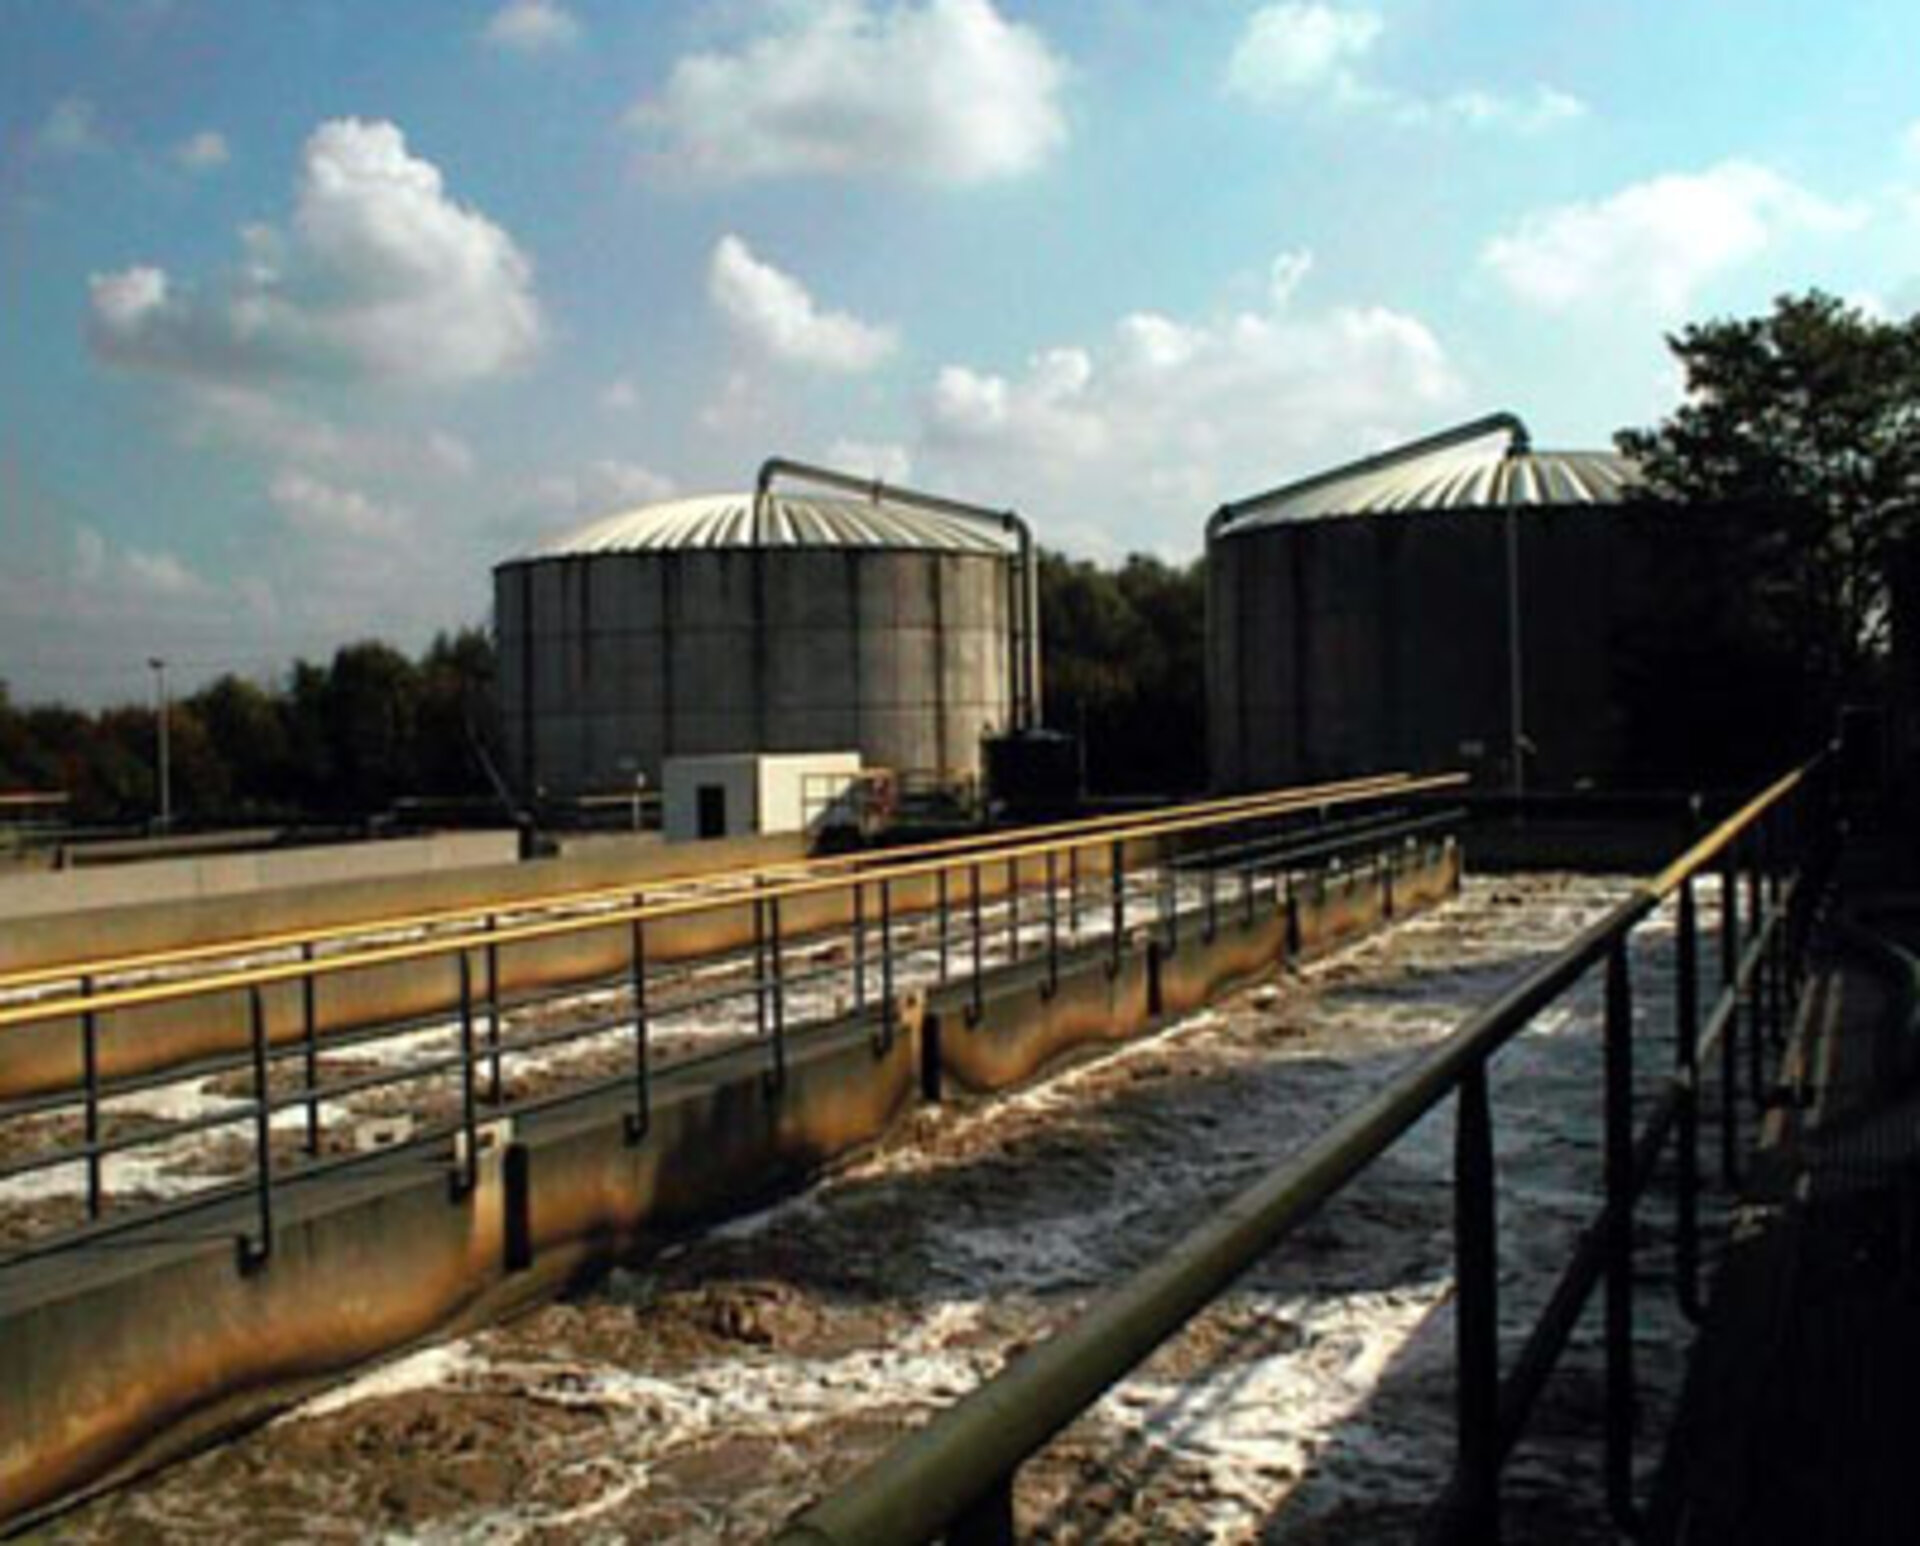 Classical activated sludge process for waste water treatment